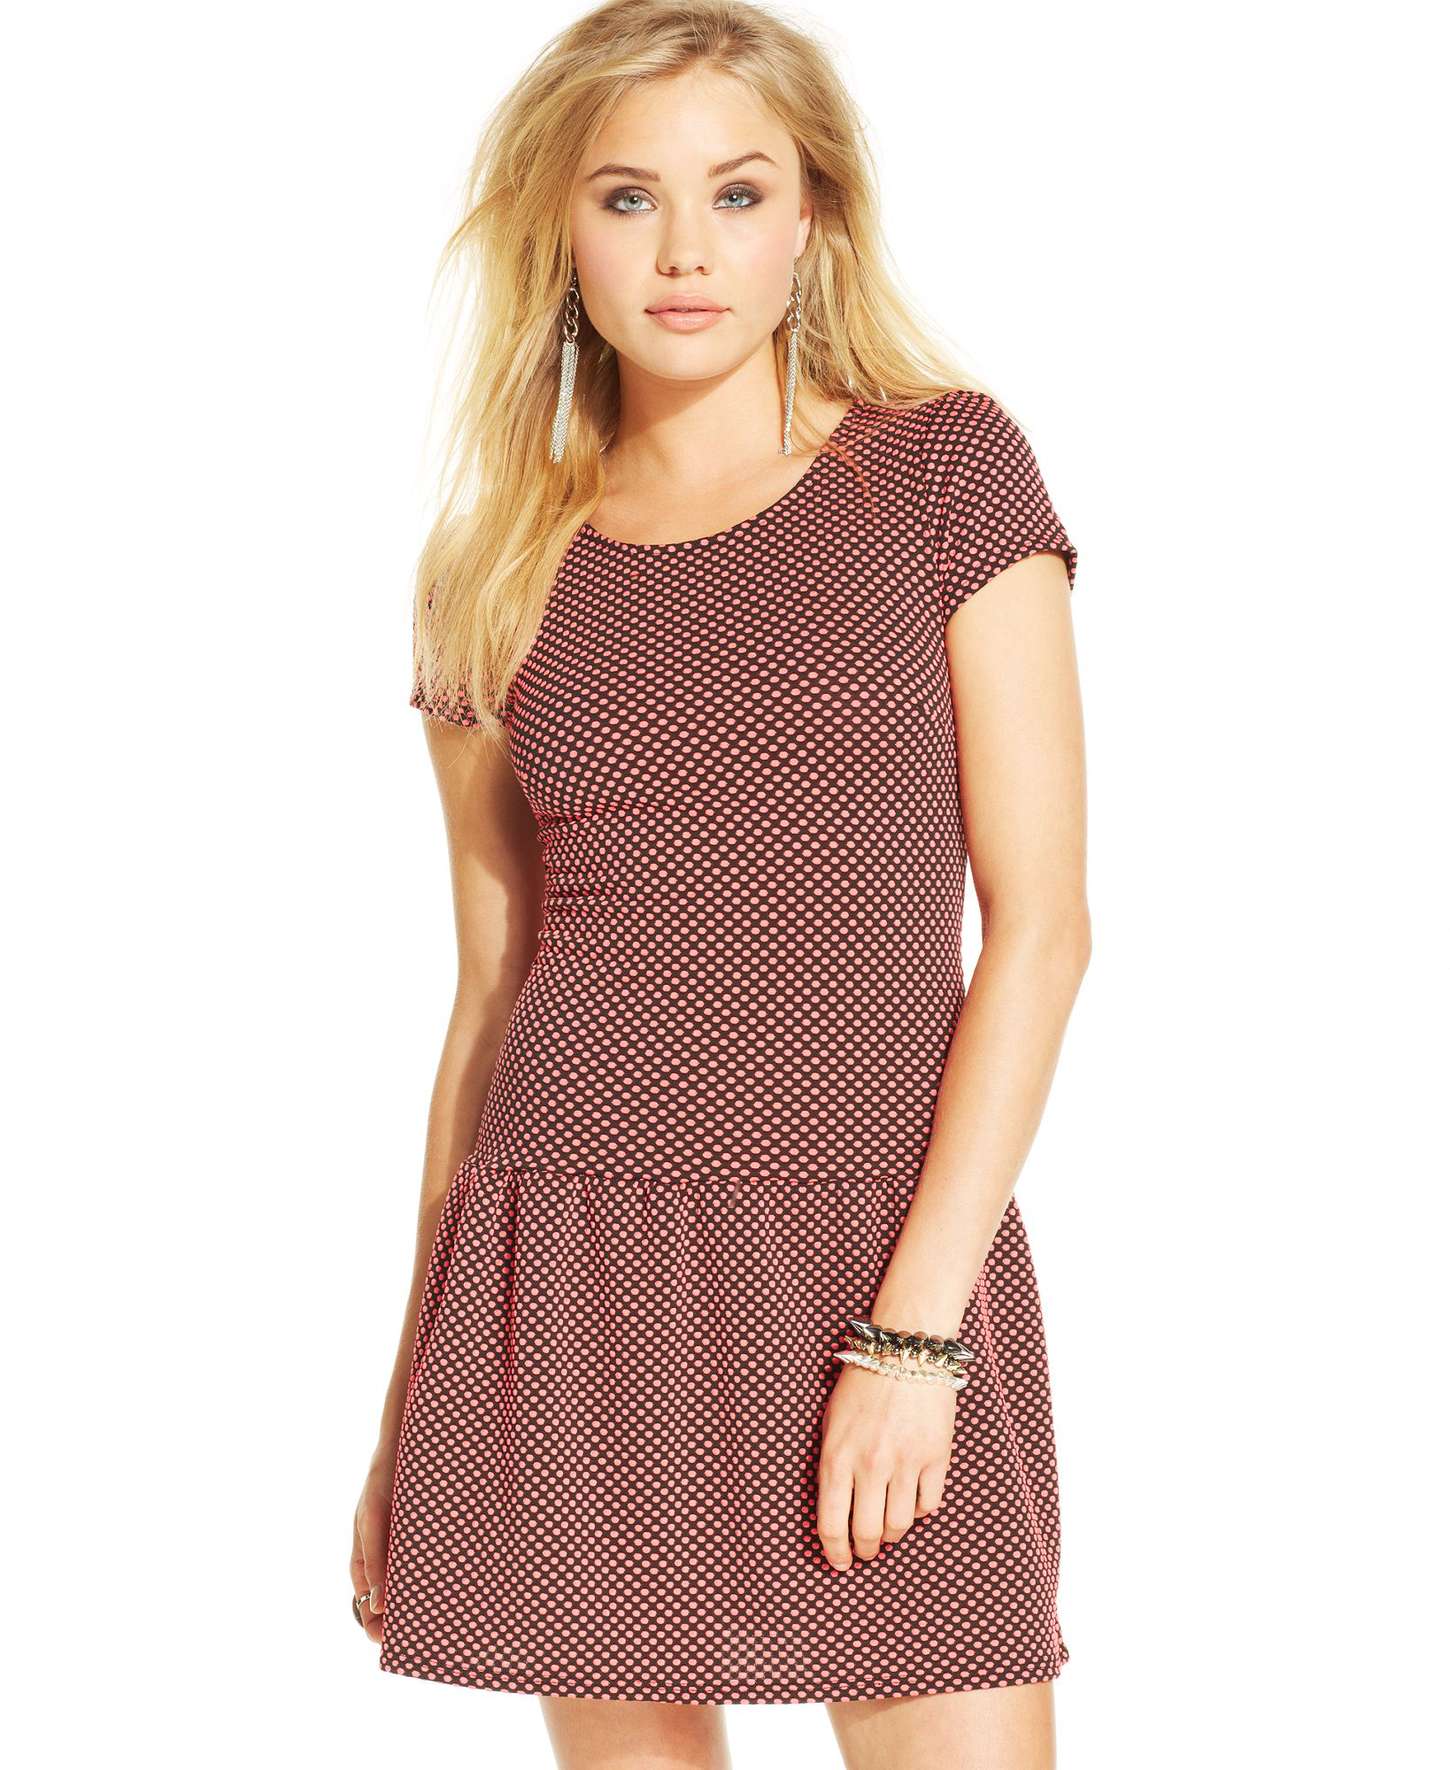 Brooke Perry: Macys Collection 2014 -01 | GotCeleb